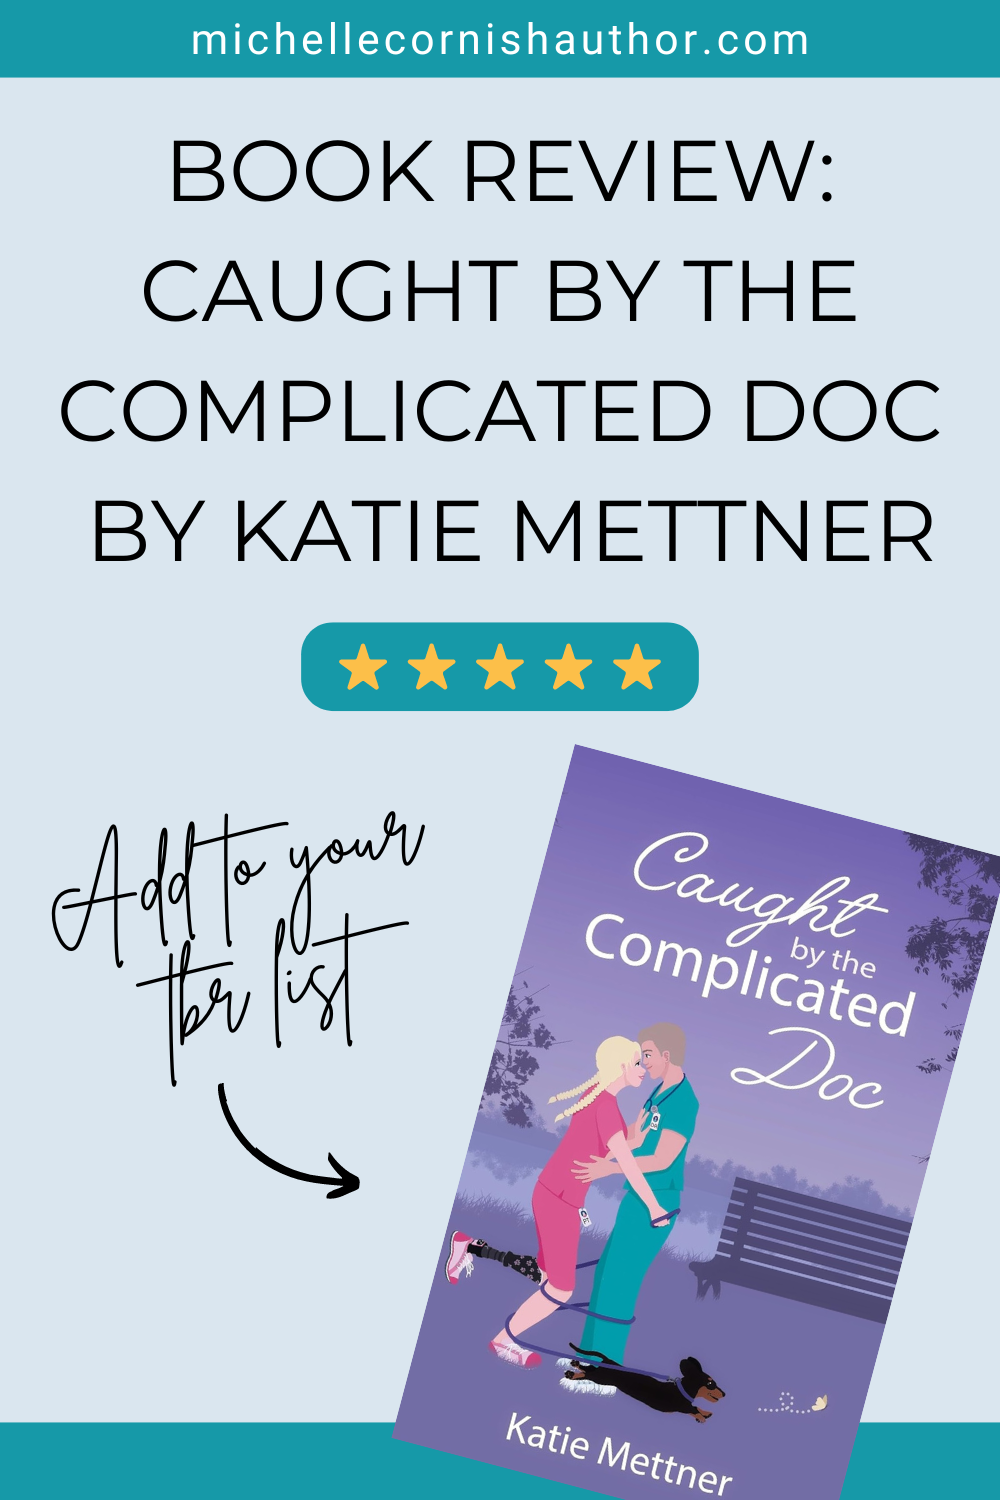 Book Review of Caught by the Complicated Doc by Katie Mettner